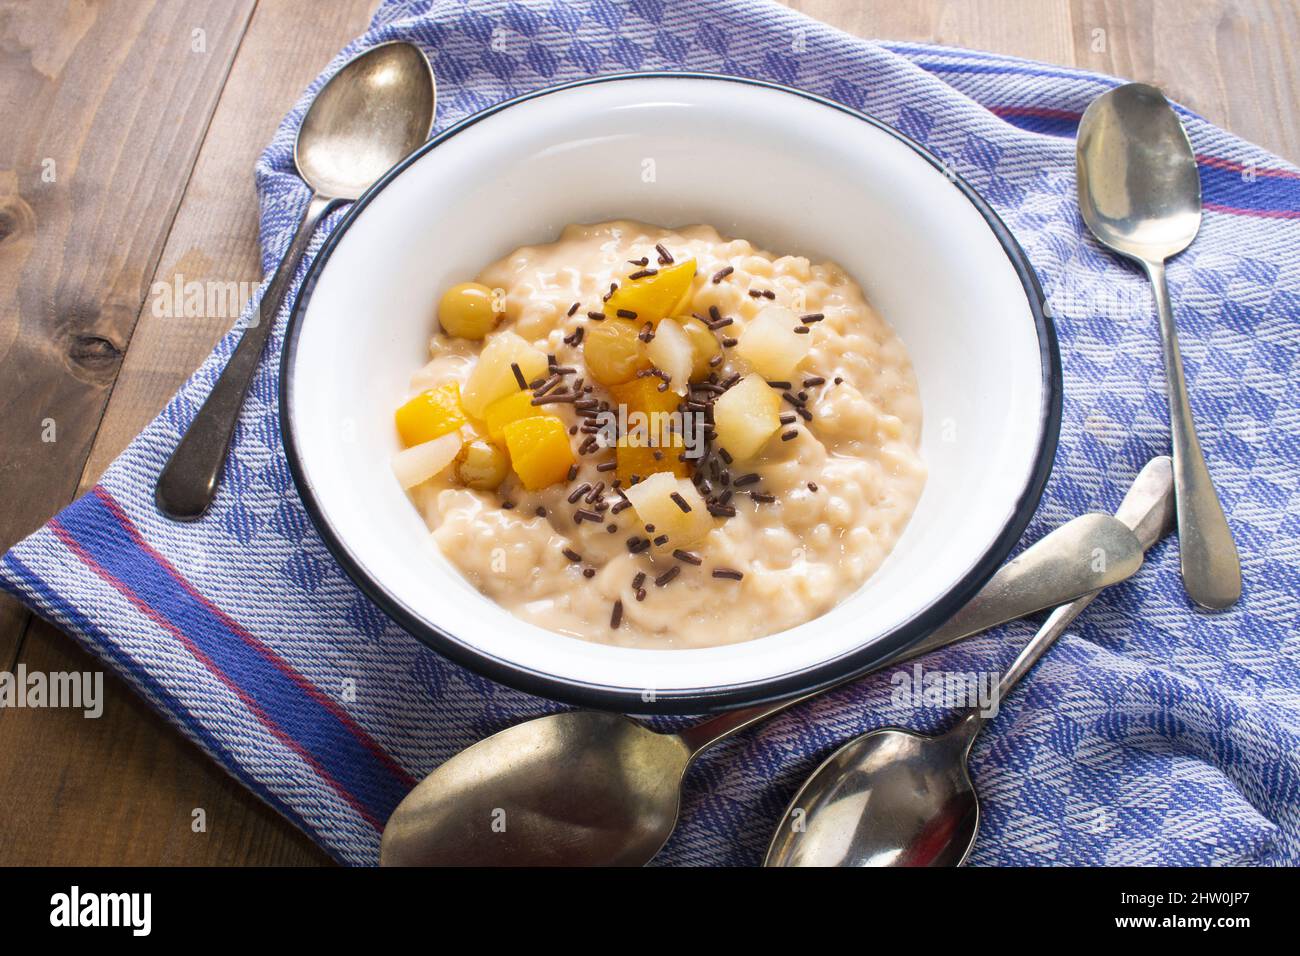 rice pudding with fruit cocktail and chocolate sprinkles in a bowl Stock Photo